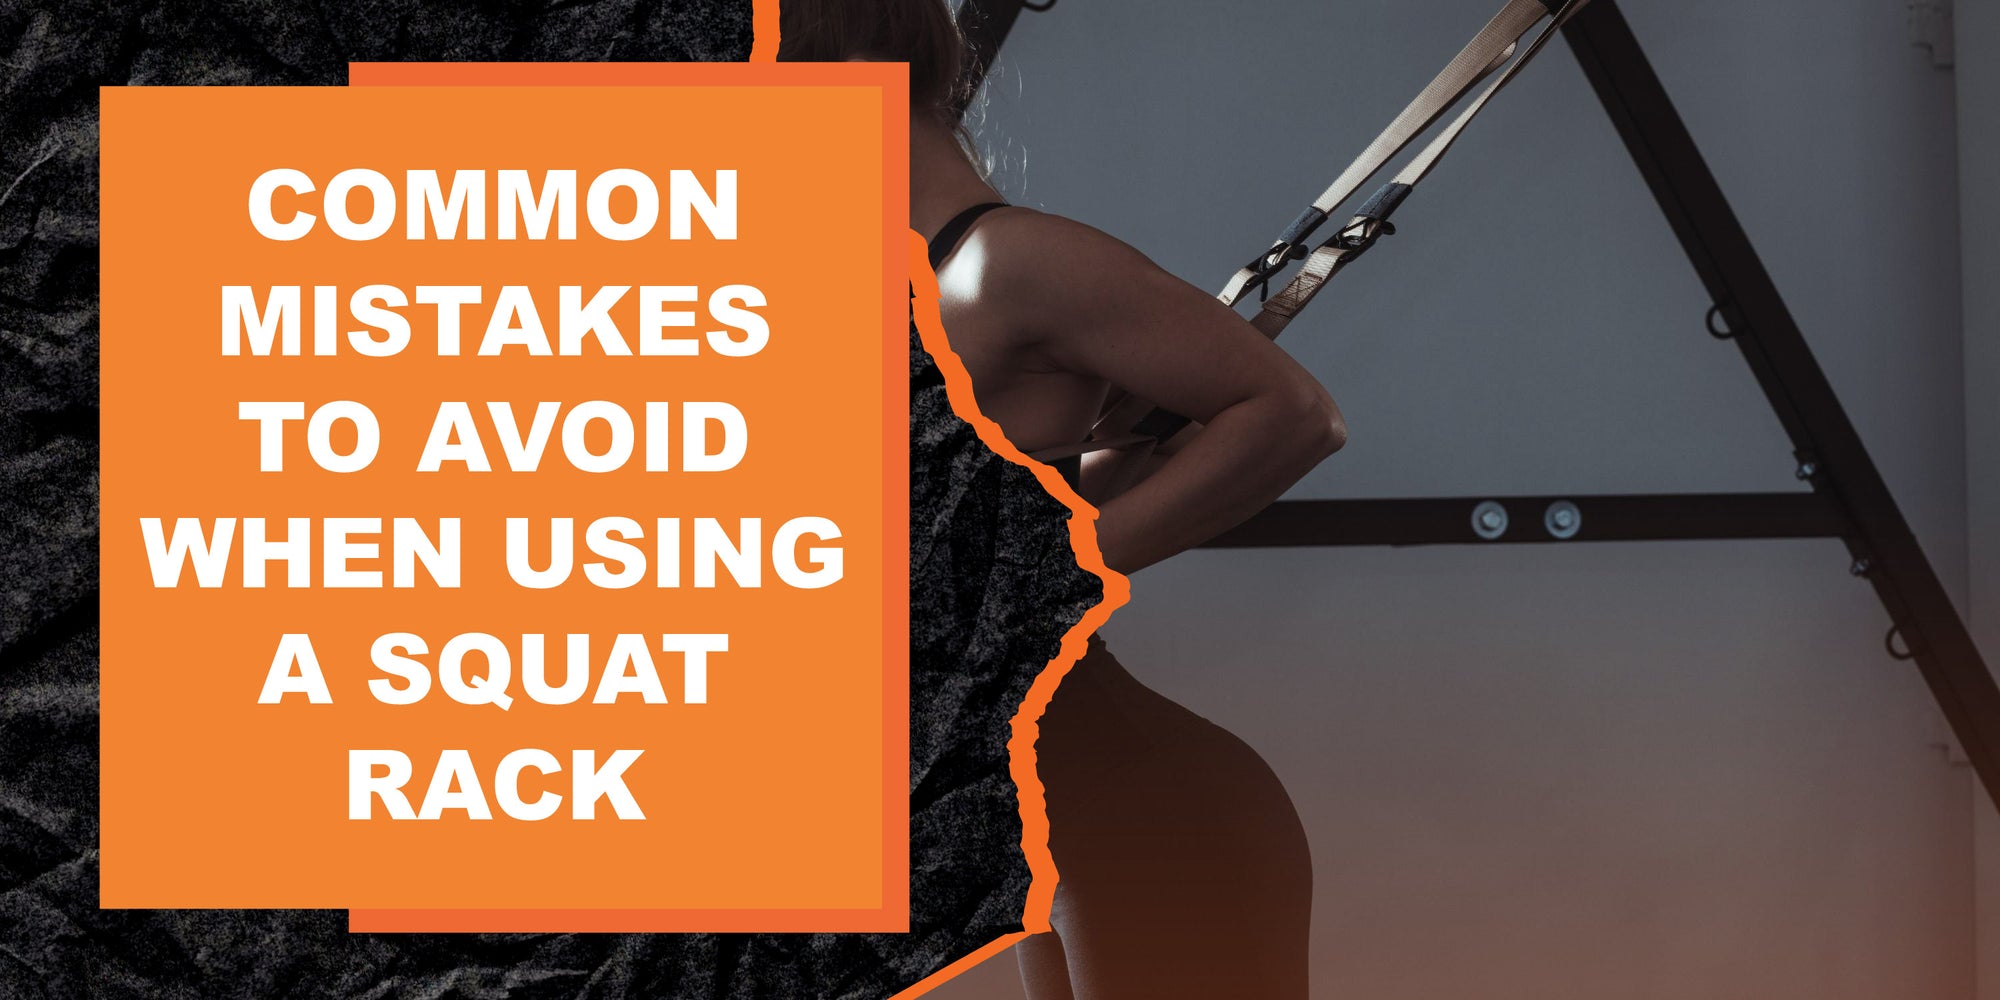 Common Mistakes to Avoid When Using a Squat Rack